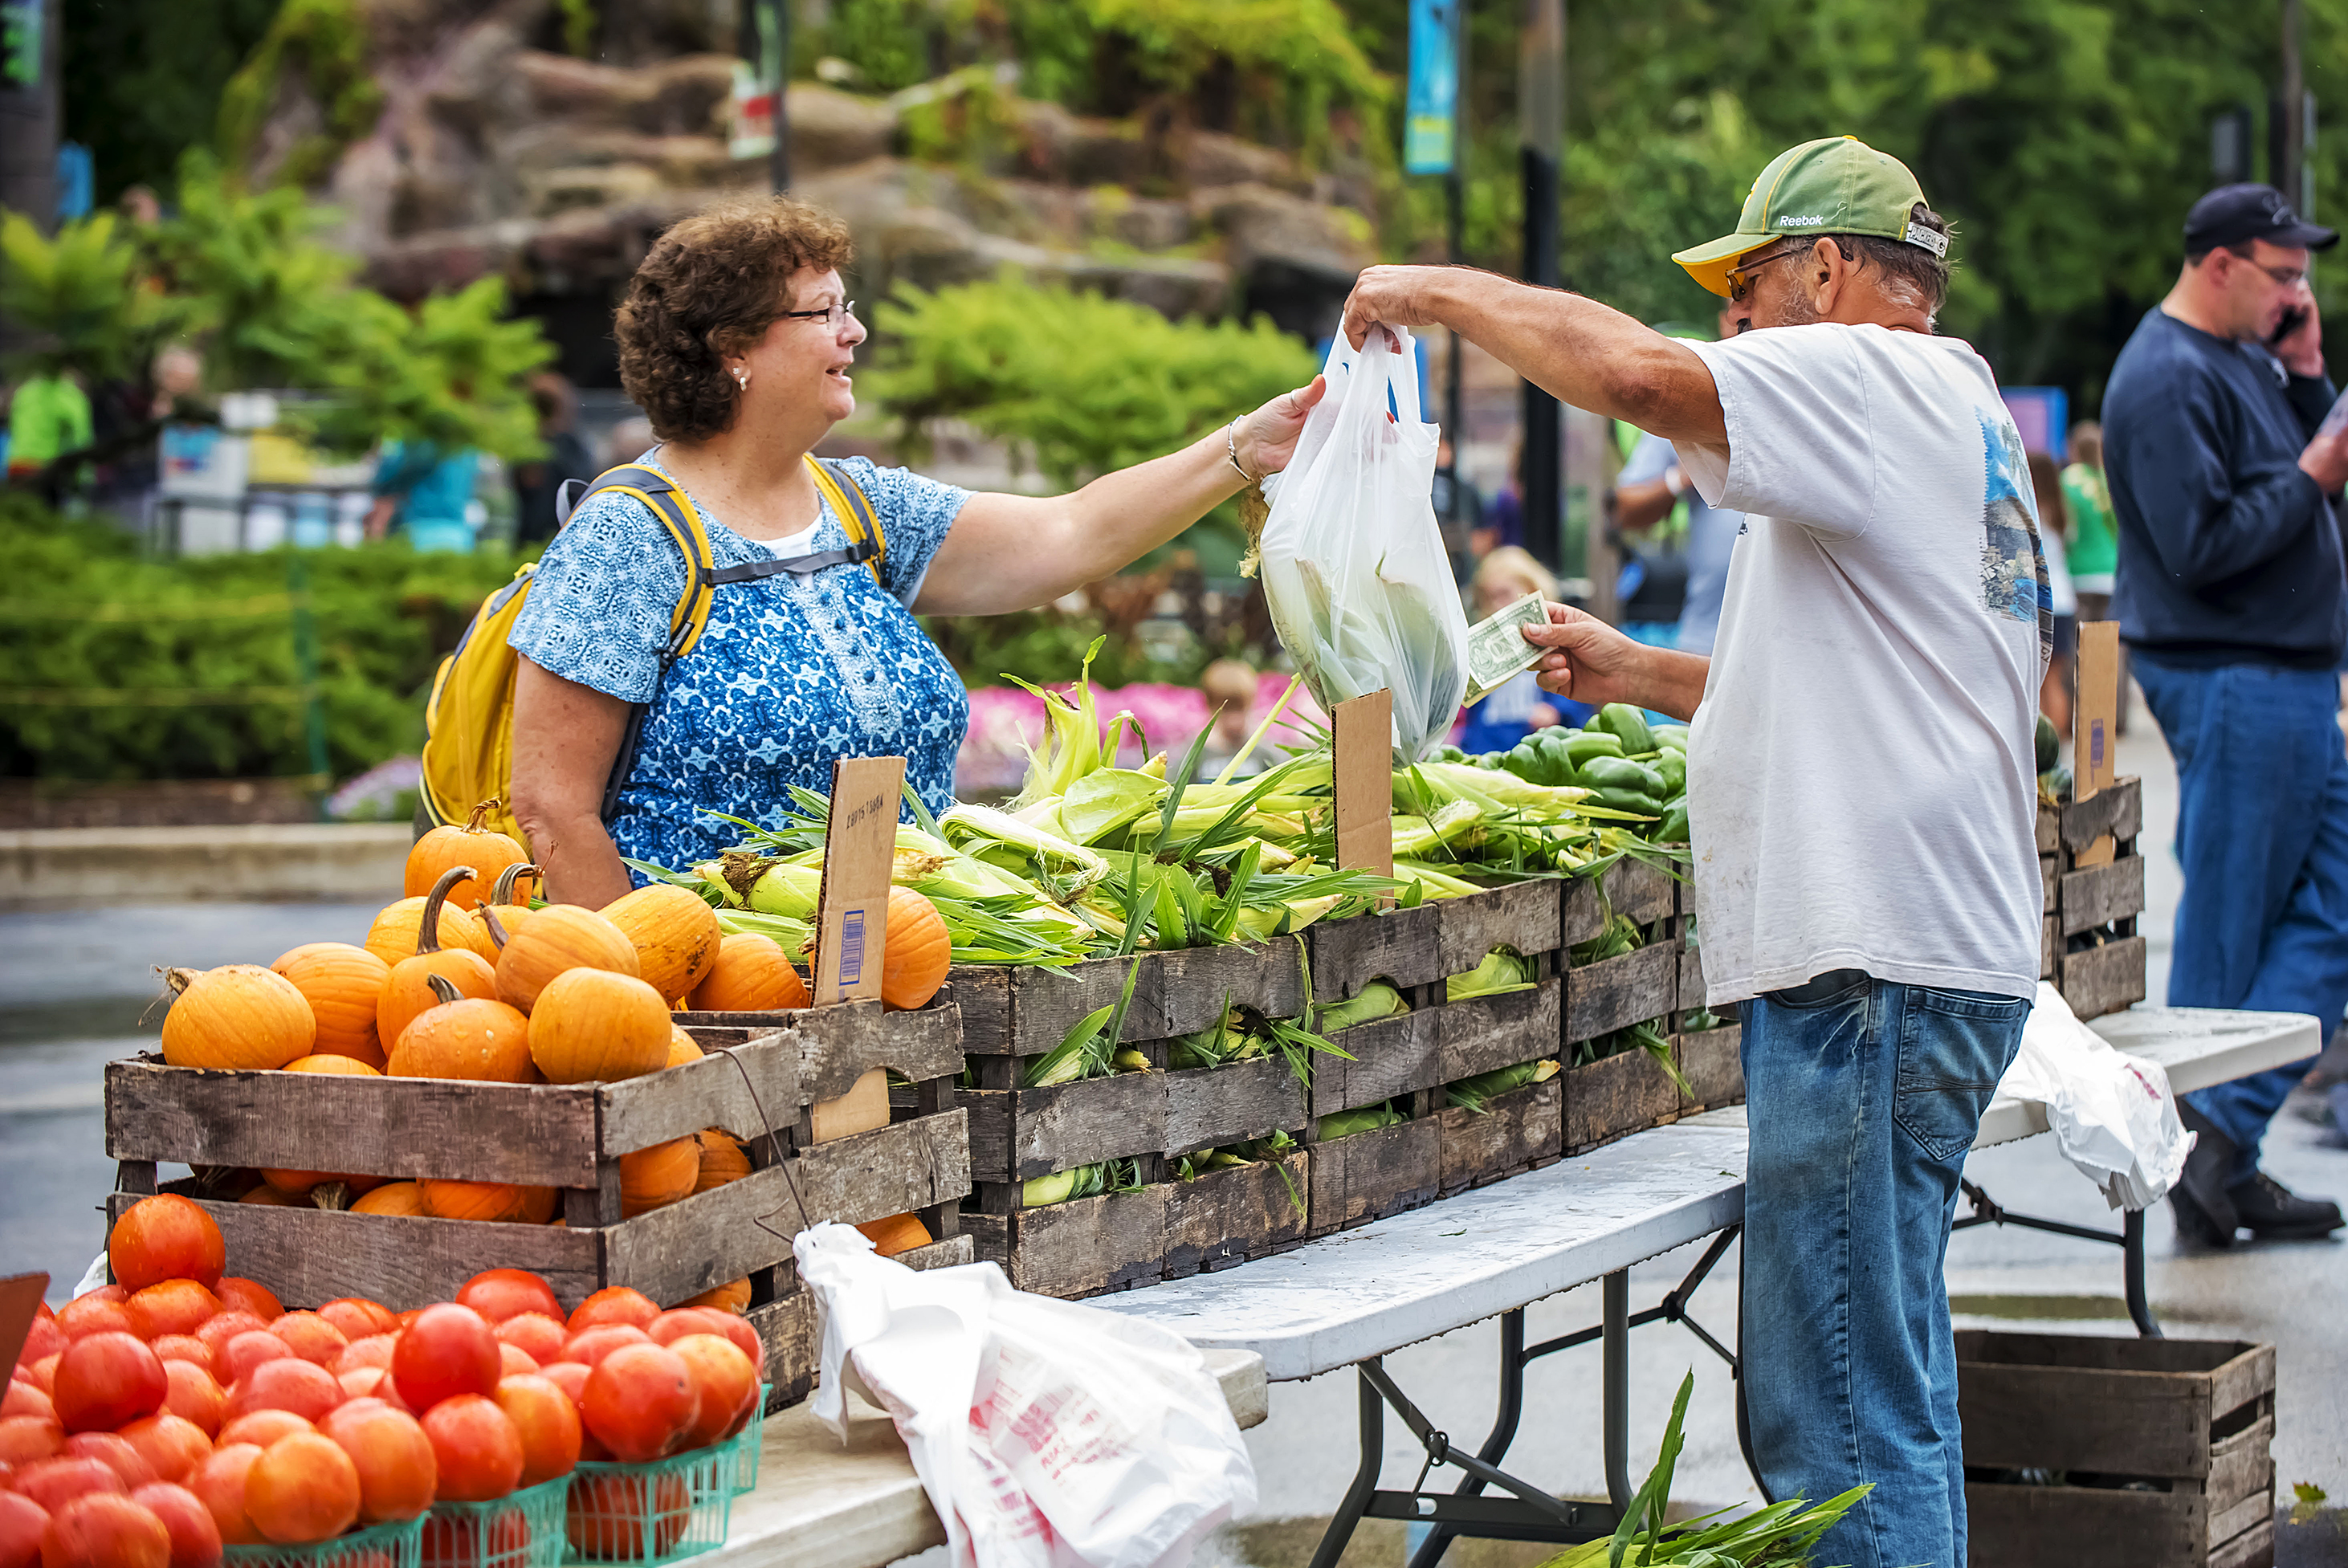 10 Crucial Tips for Shopping at Farmers Markets